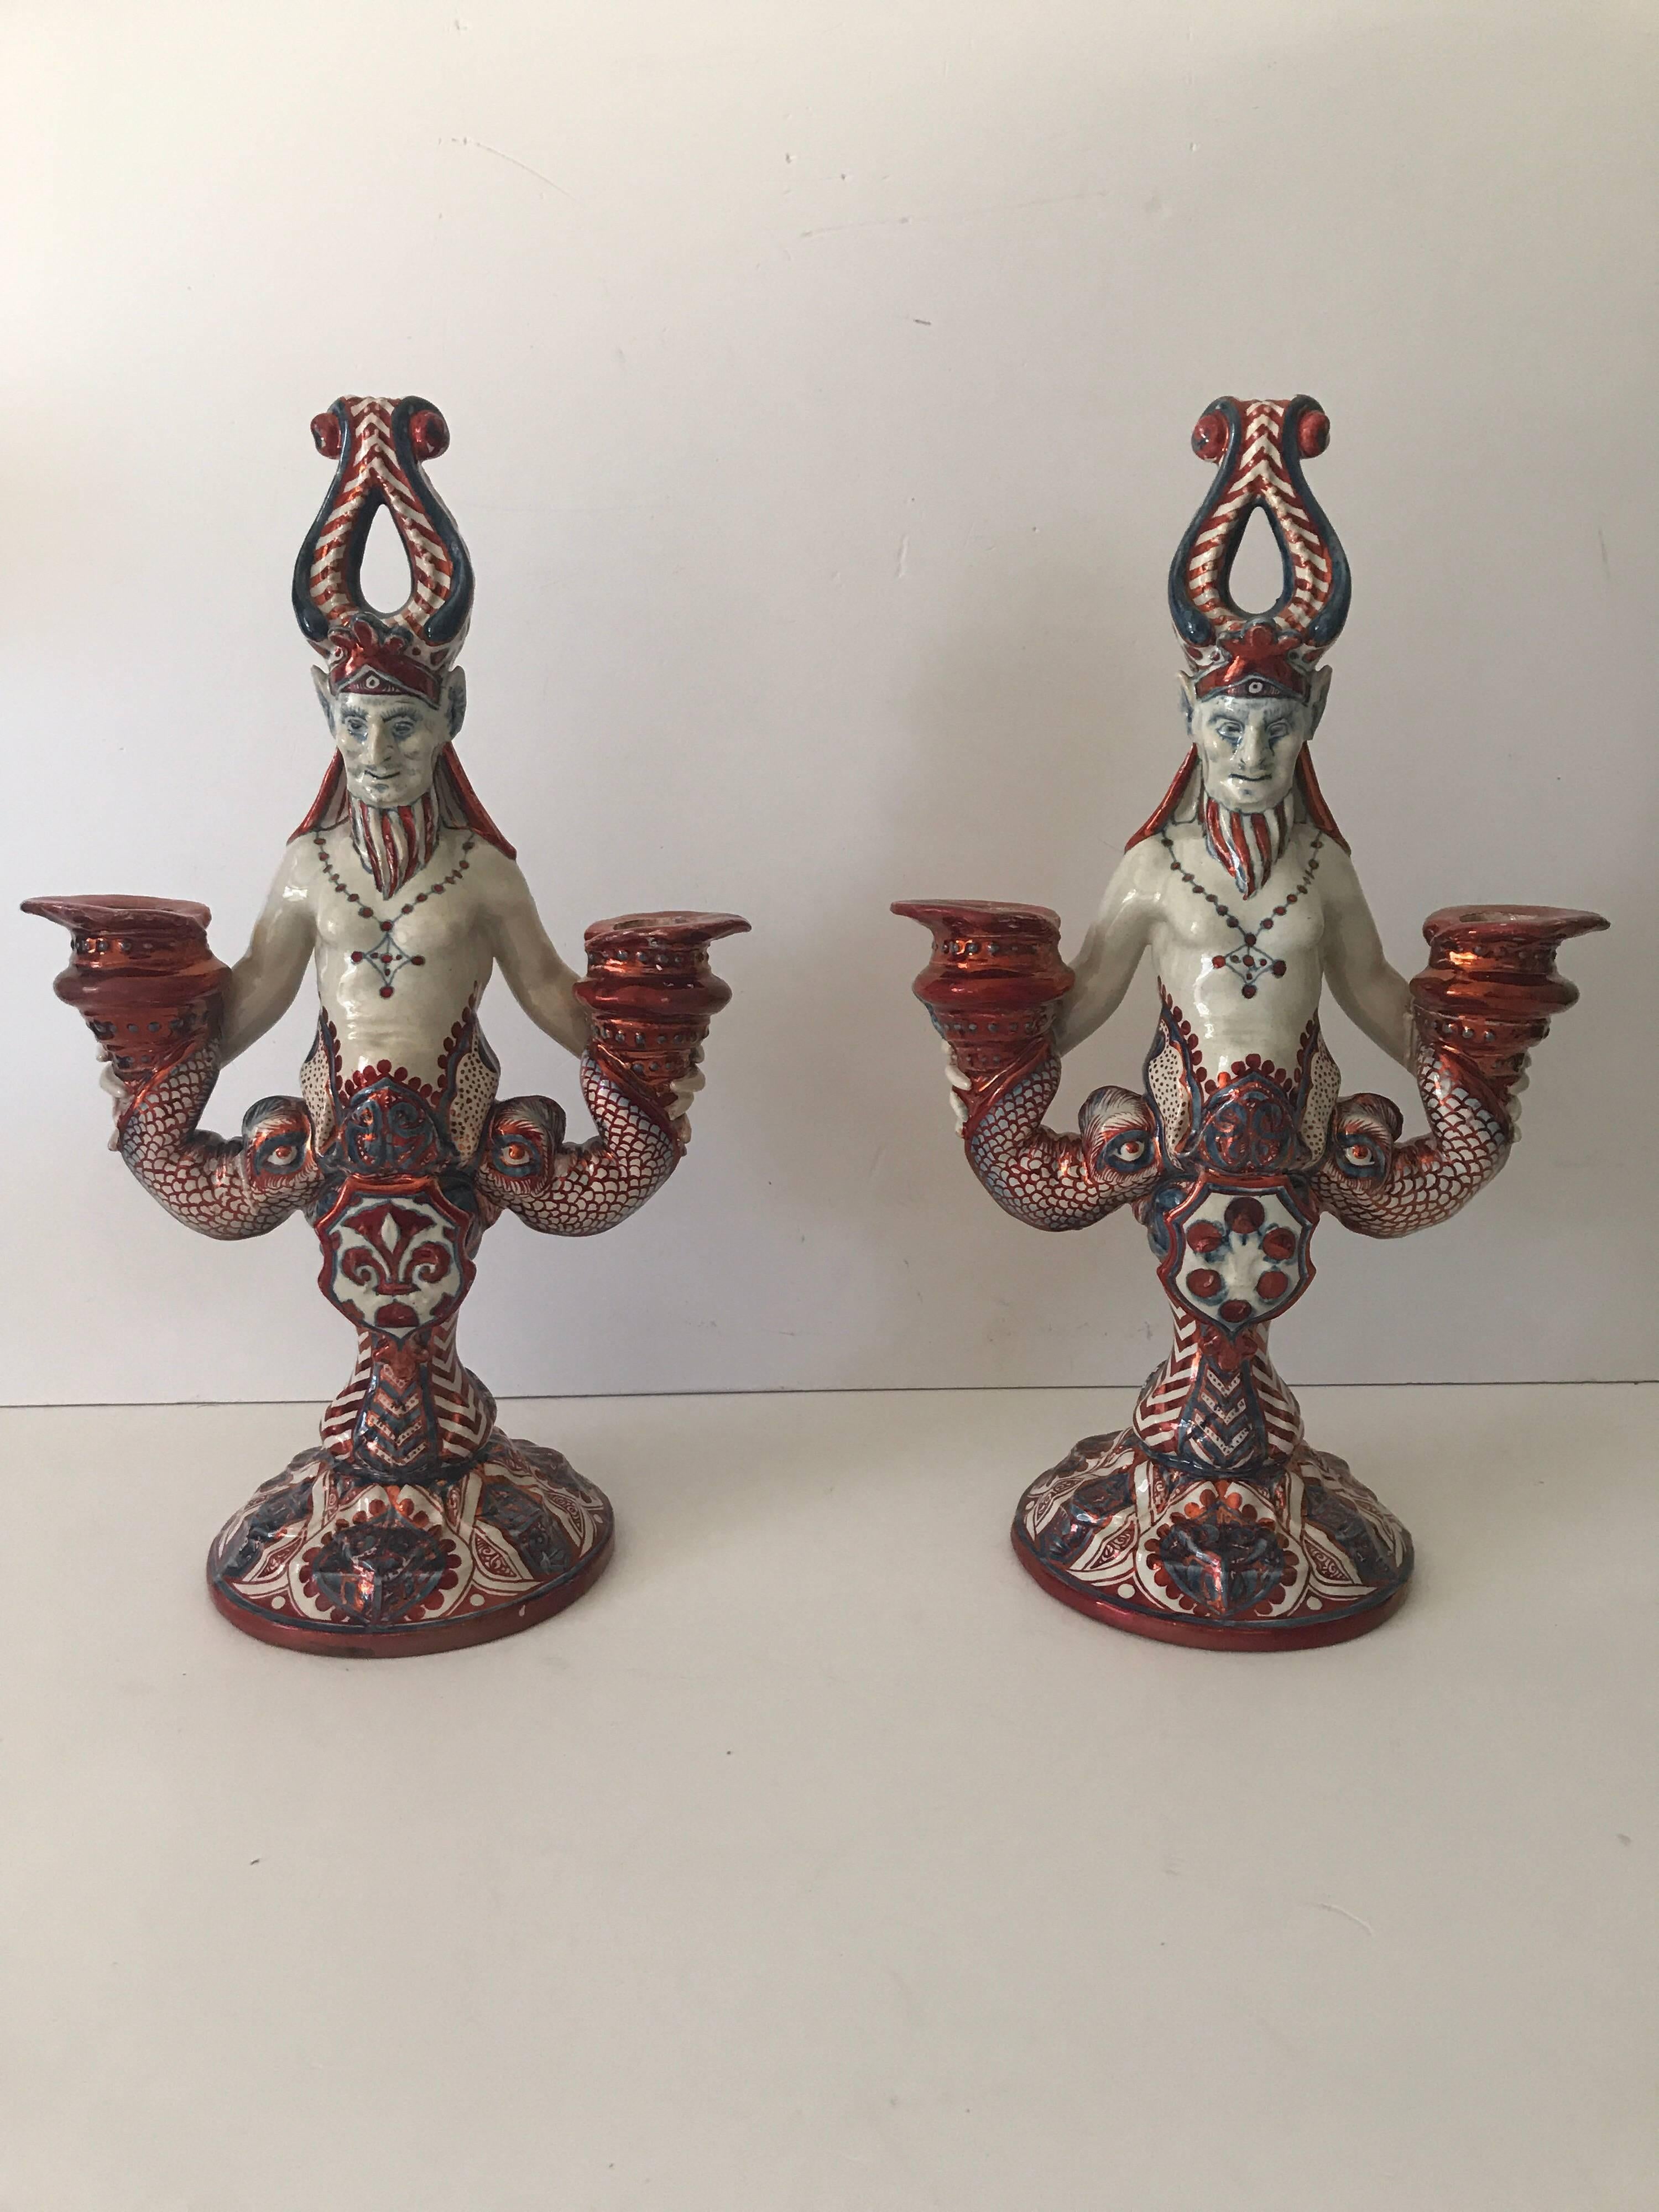 Very rare pair Italian 19th century Cantagalli earthenware demon candelabras.
A nice similar pair of rare and special demon candelabras, they are not 100% similar, they differ from the shield in the centre. But otherwise they are the same. The